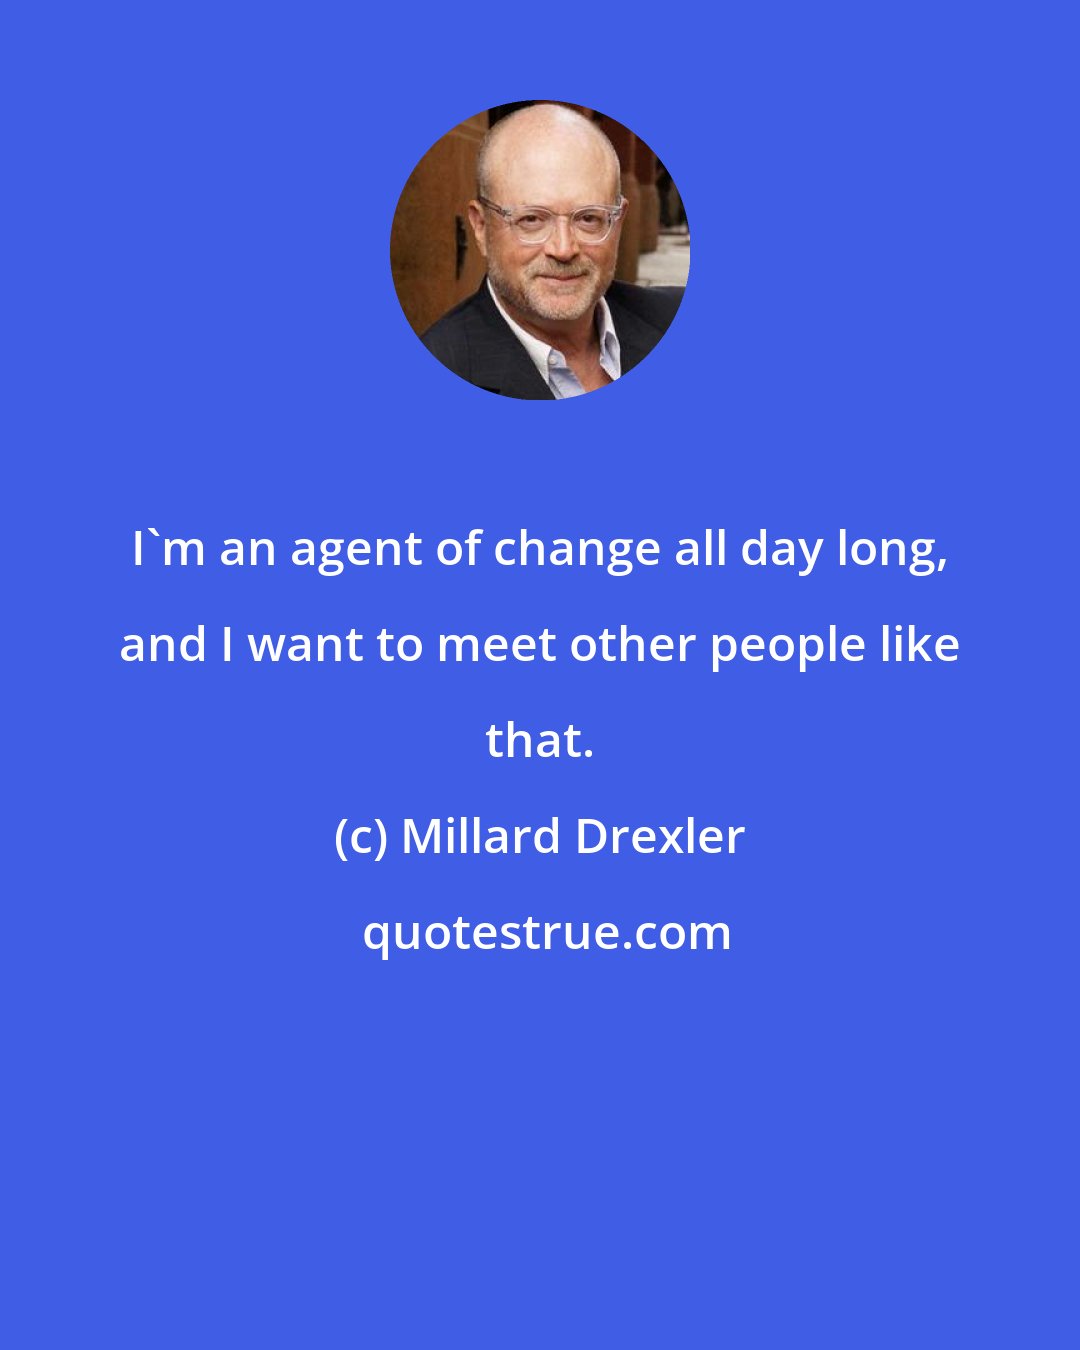 Millard Drexler: I'm an agent of change all day long, and I want to meet other people like that.